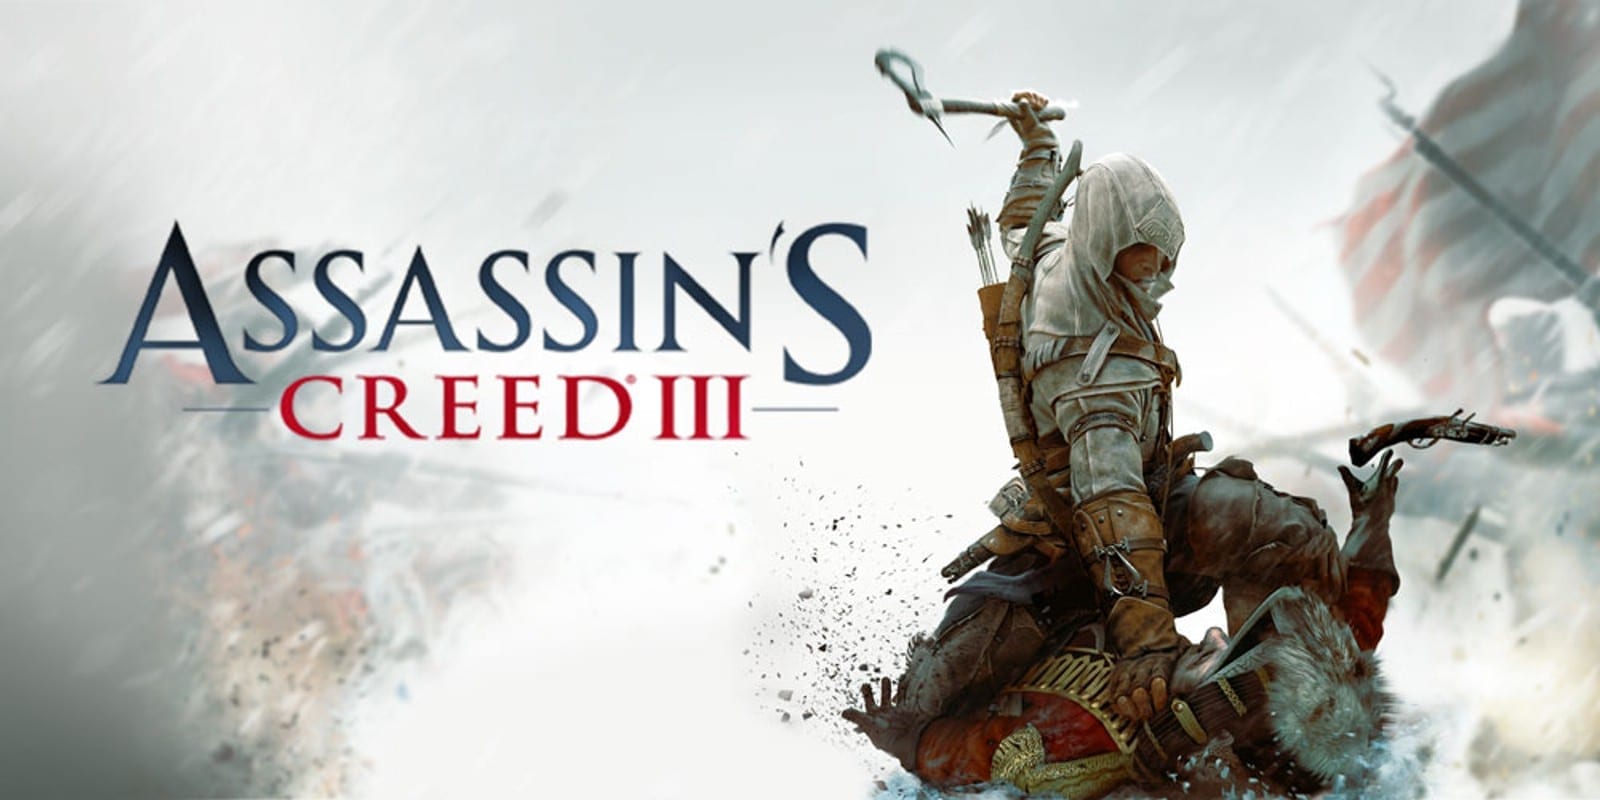 Ubisoft Reveals More Info On Its Assassin's Creed 3 Remaster